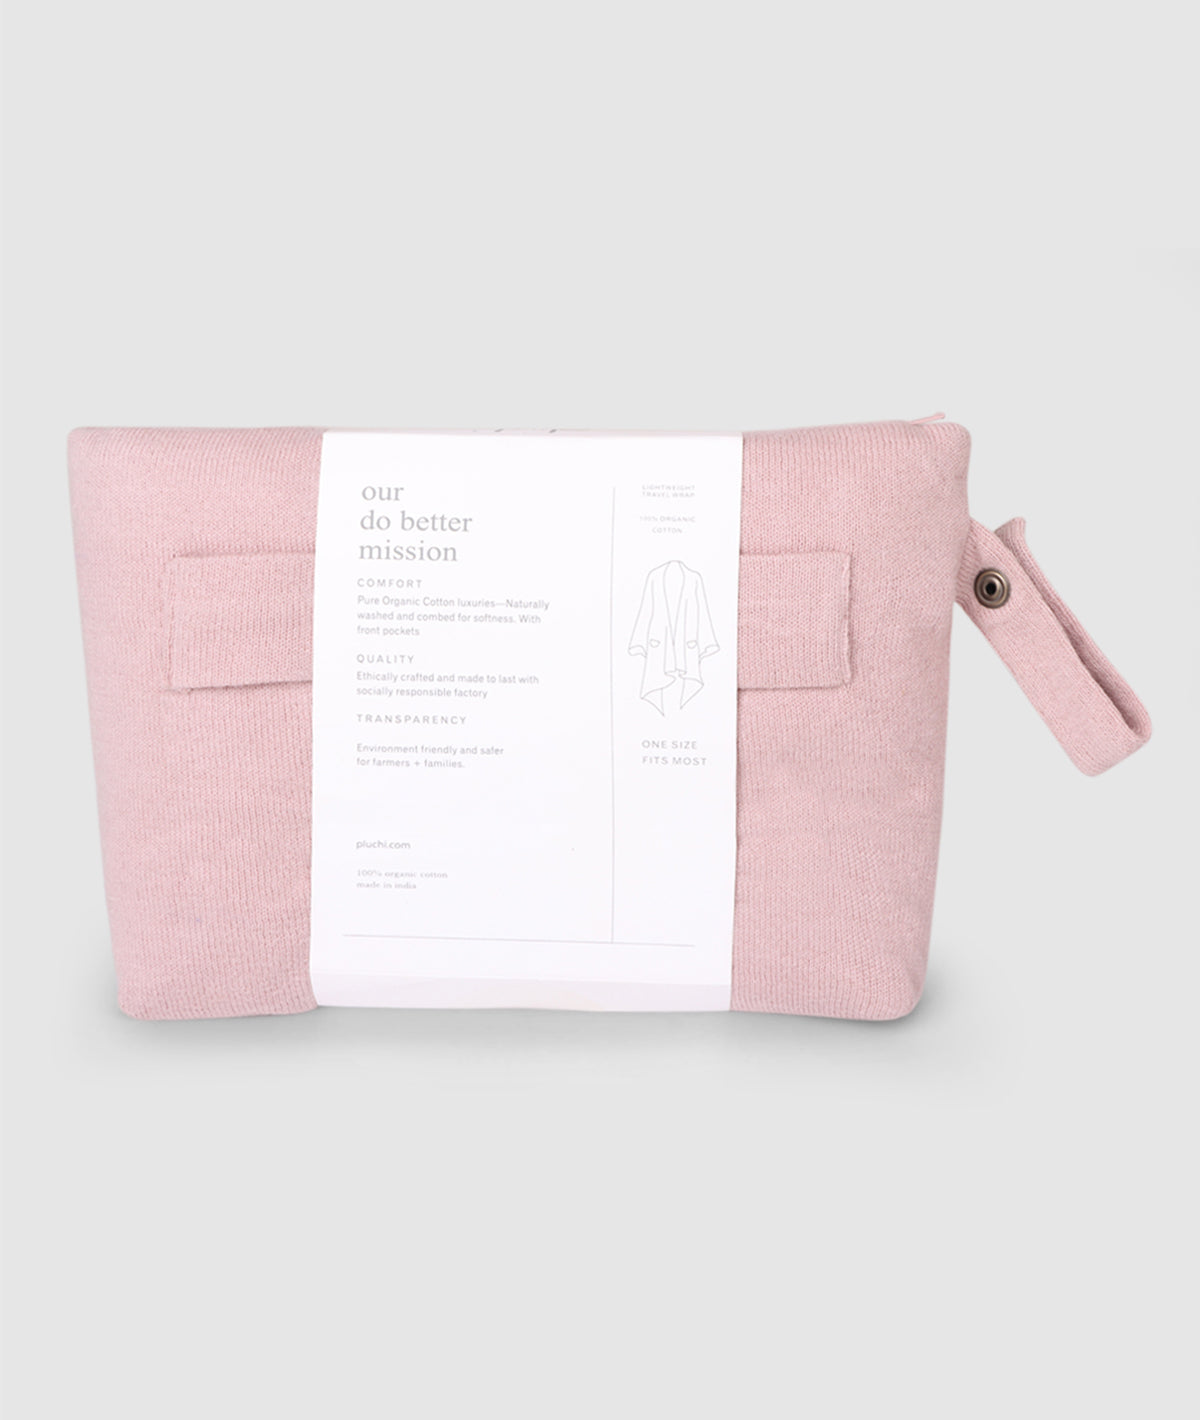 Classic Travel Wrap - Organic Cotton Knitted Light Weight Wrap in Pouch (Cameo Pink)